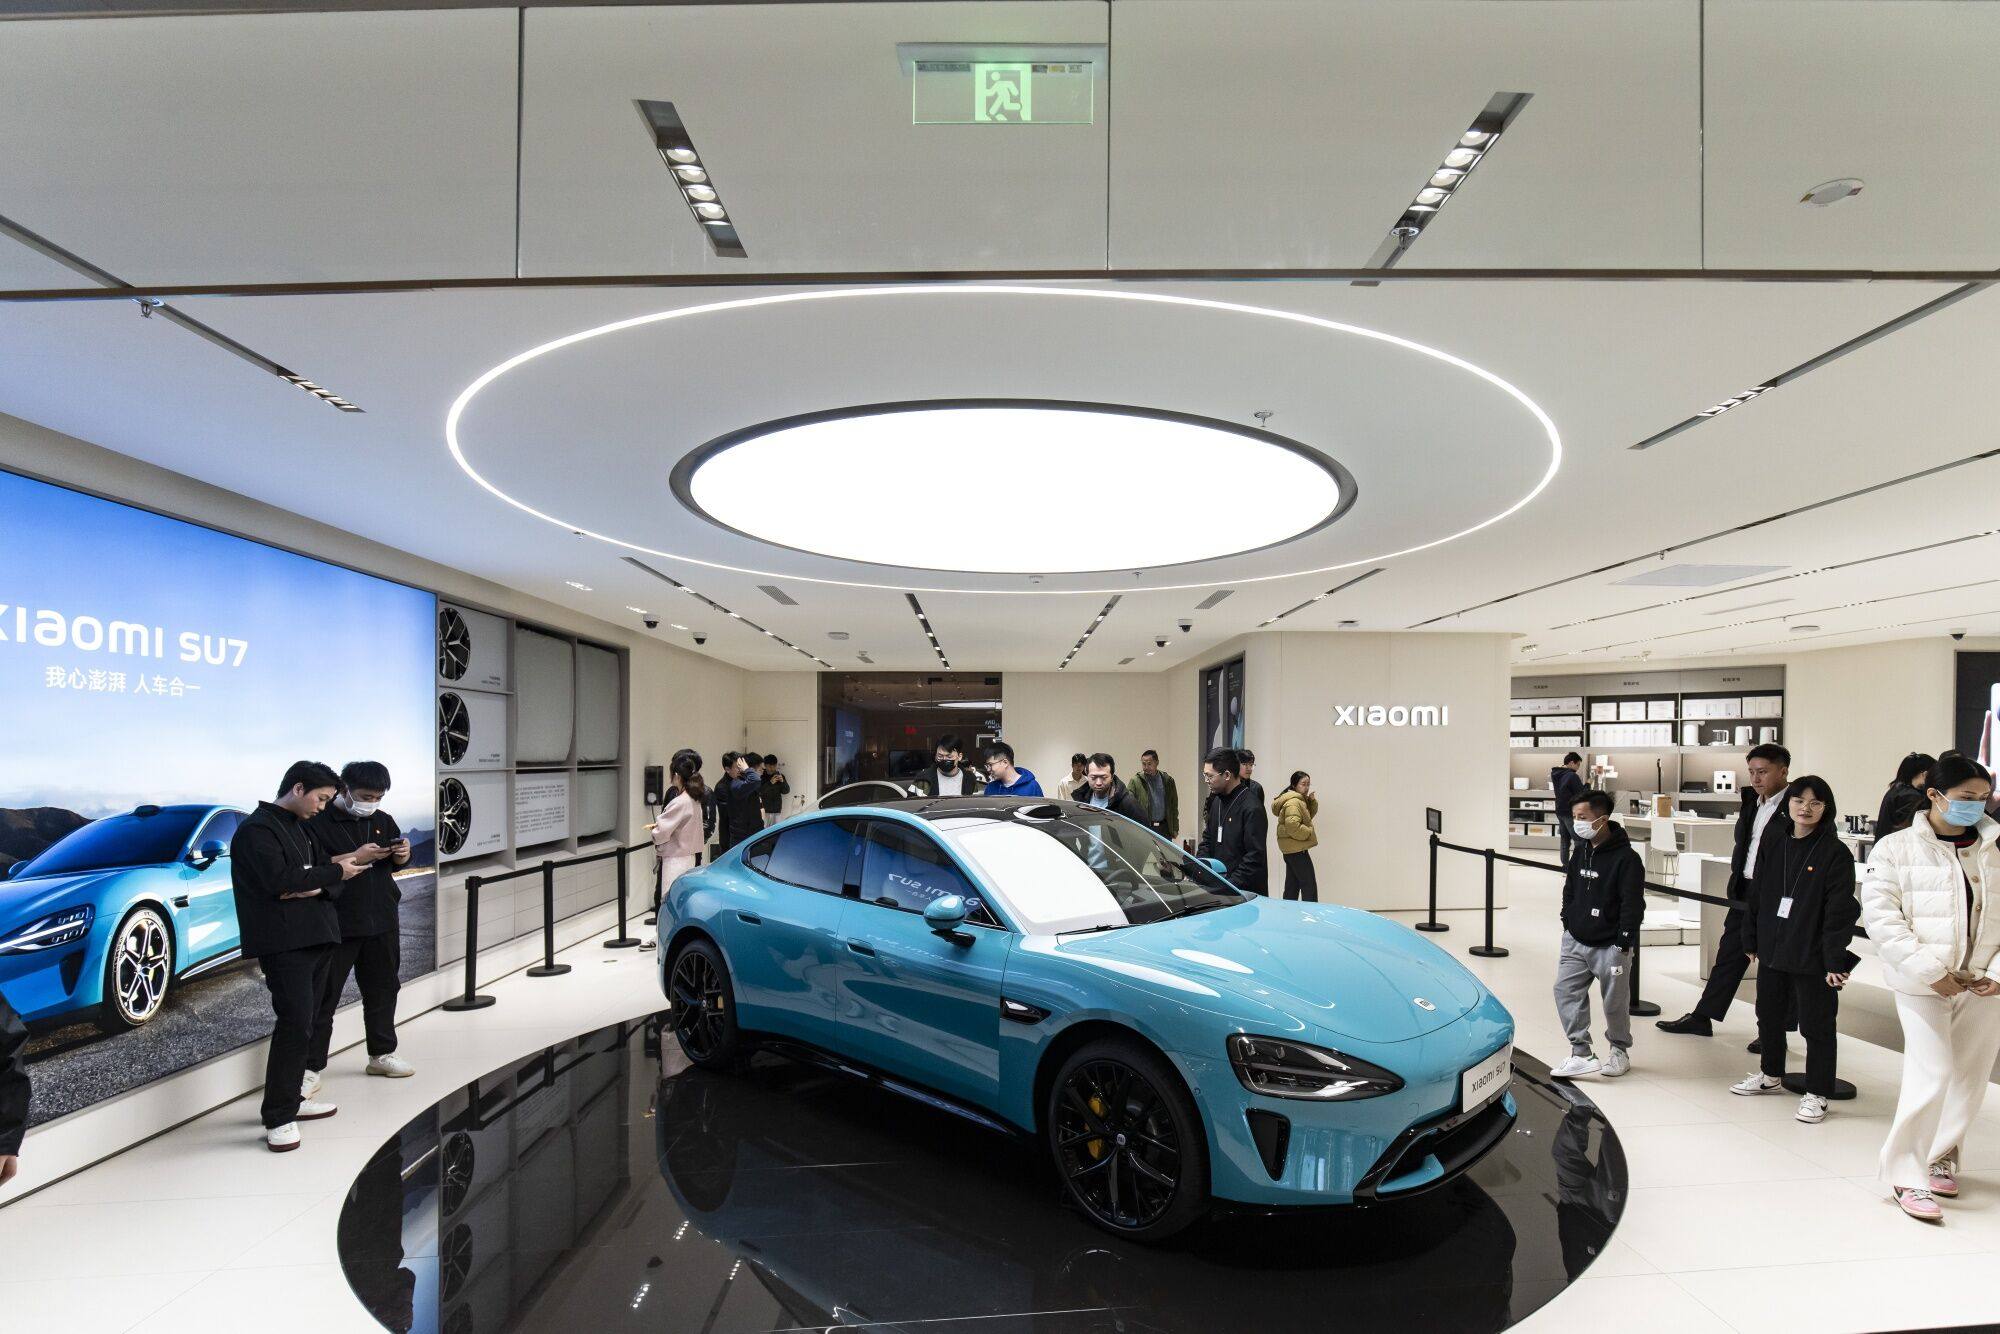 China’s electric vehicle industry is poised to be world-leading, but trade curbs from the US and EU could stifle expansion. Photo: Bloomberg